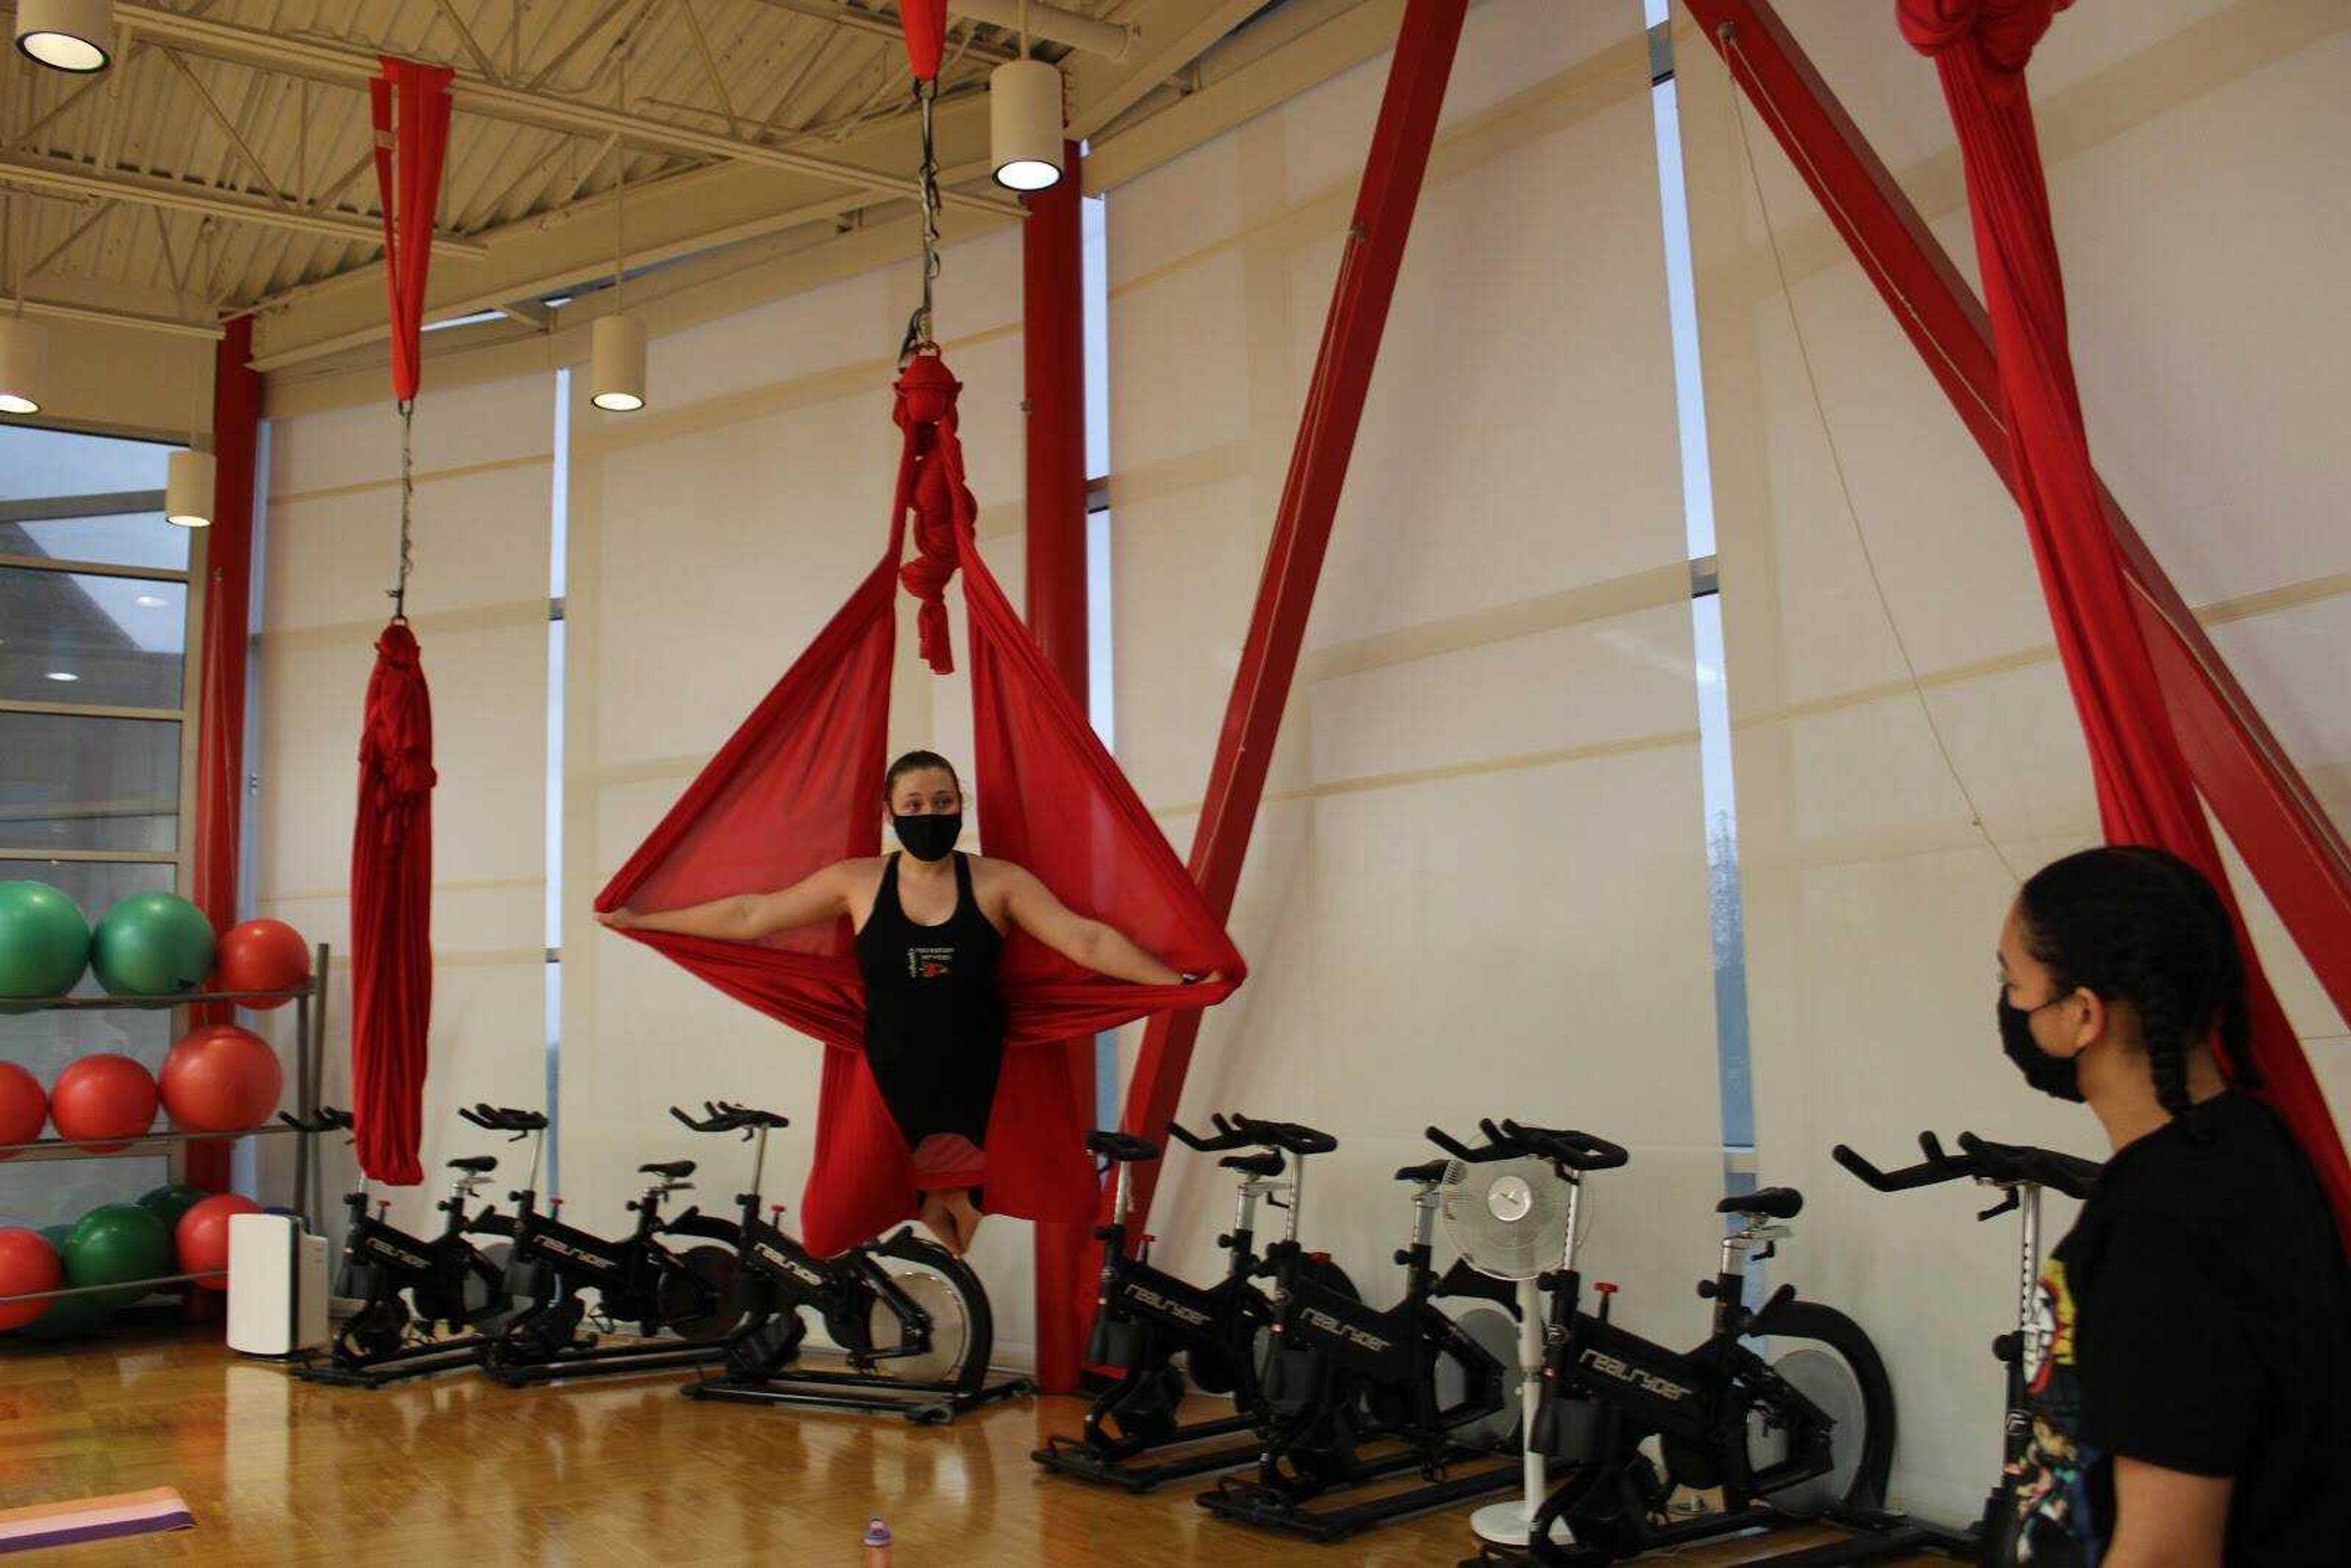 During the skills portion of the aerial yoga class, instructor Danielle Naeger demonstrates the “butterfly” pose as student Calantha Remy watches.